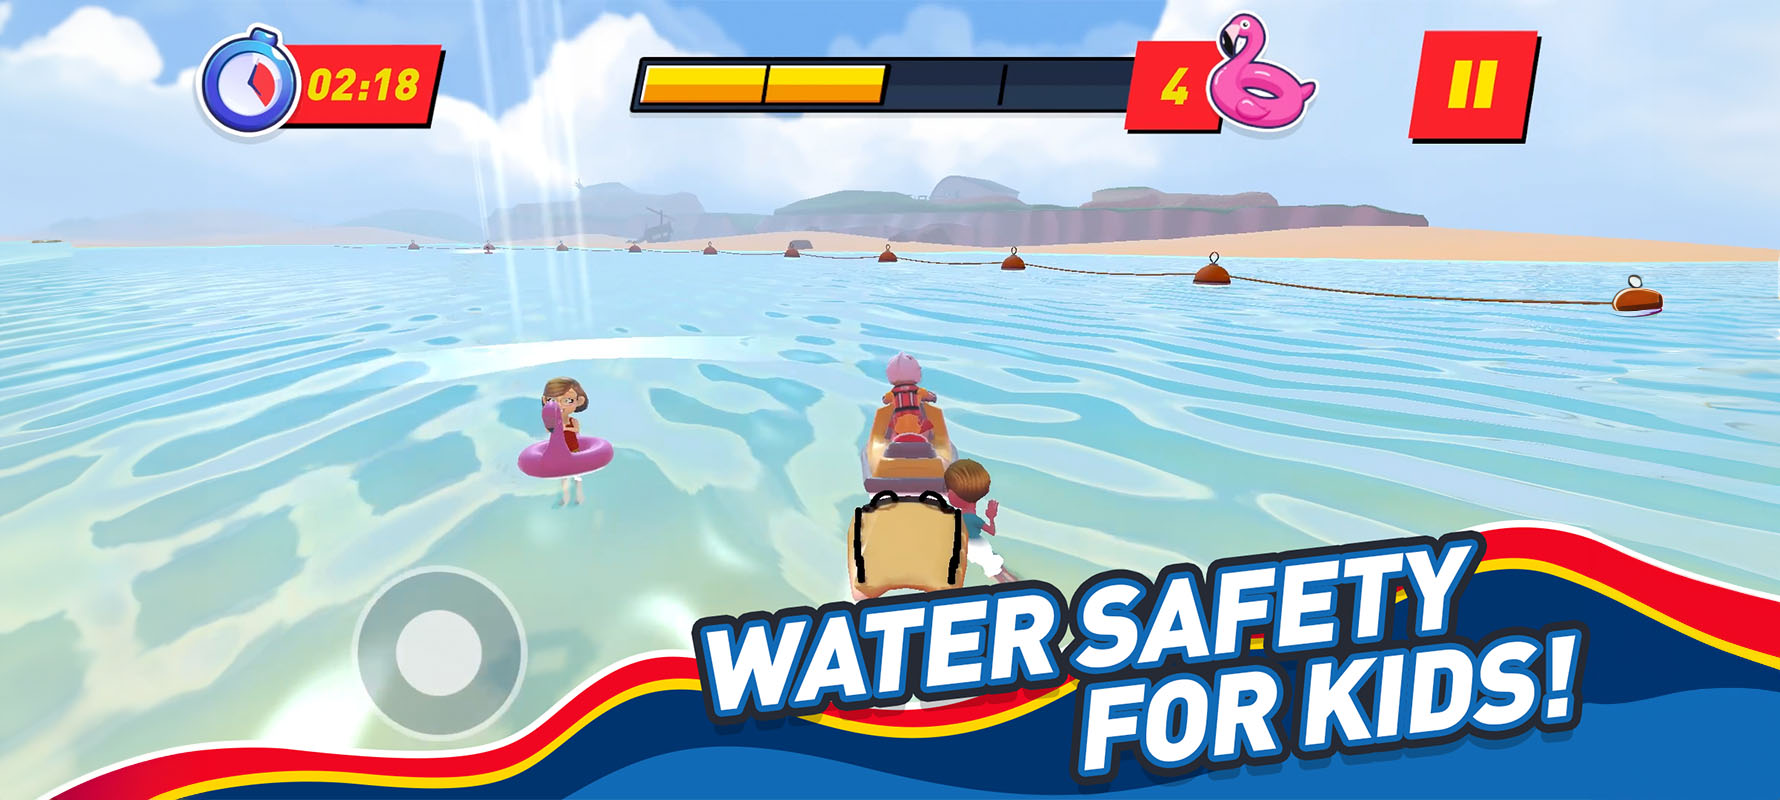 A still from the RNLI’s Storm Force Rescue game showing a lifeguard rescuing a person in the sea using a rescue watercraft.